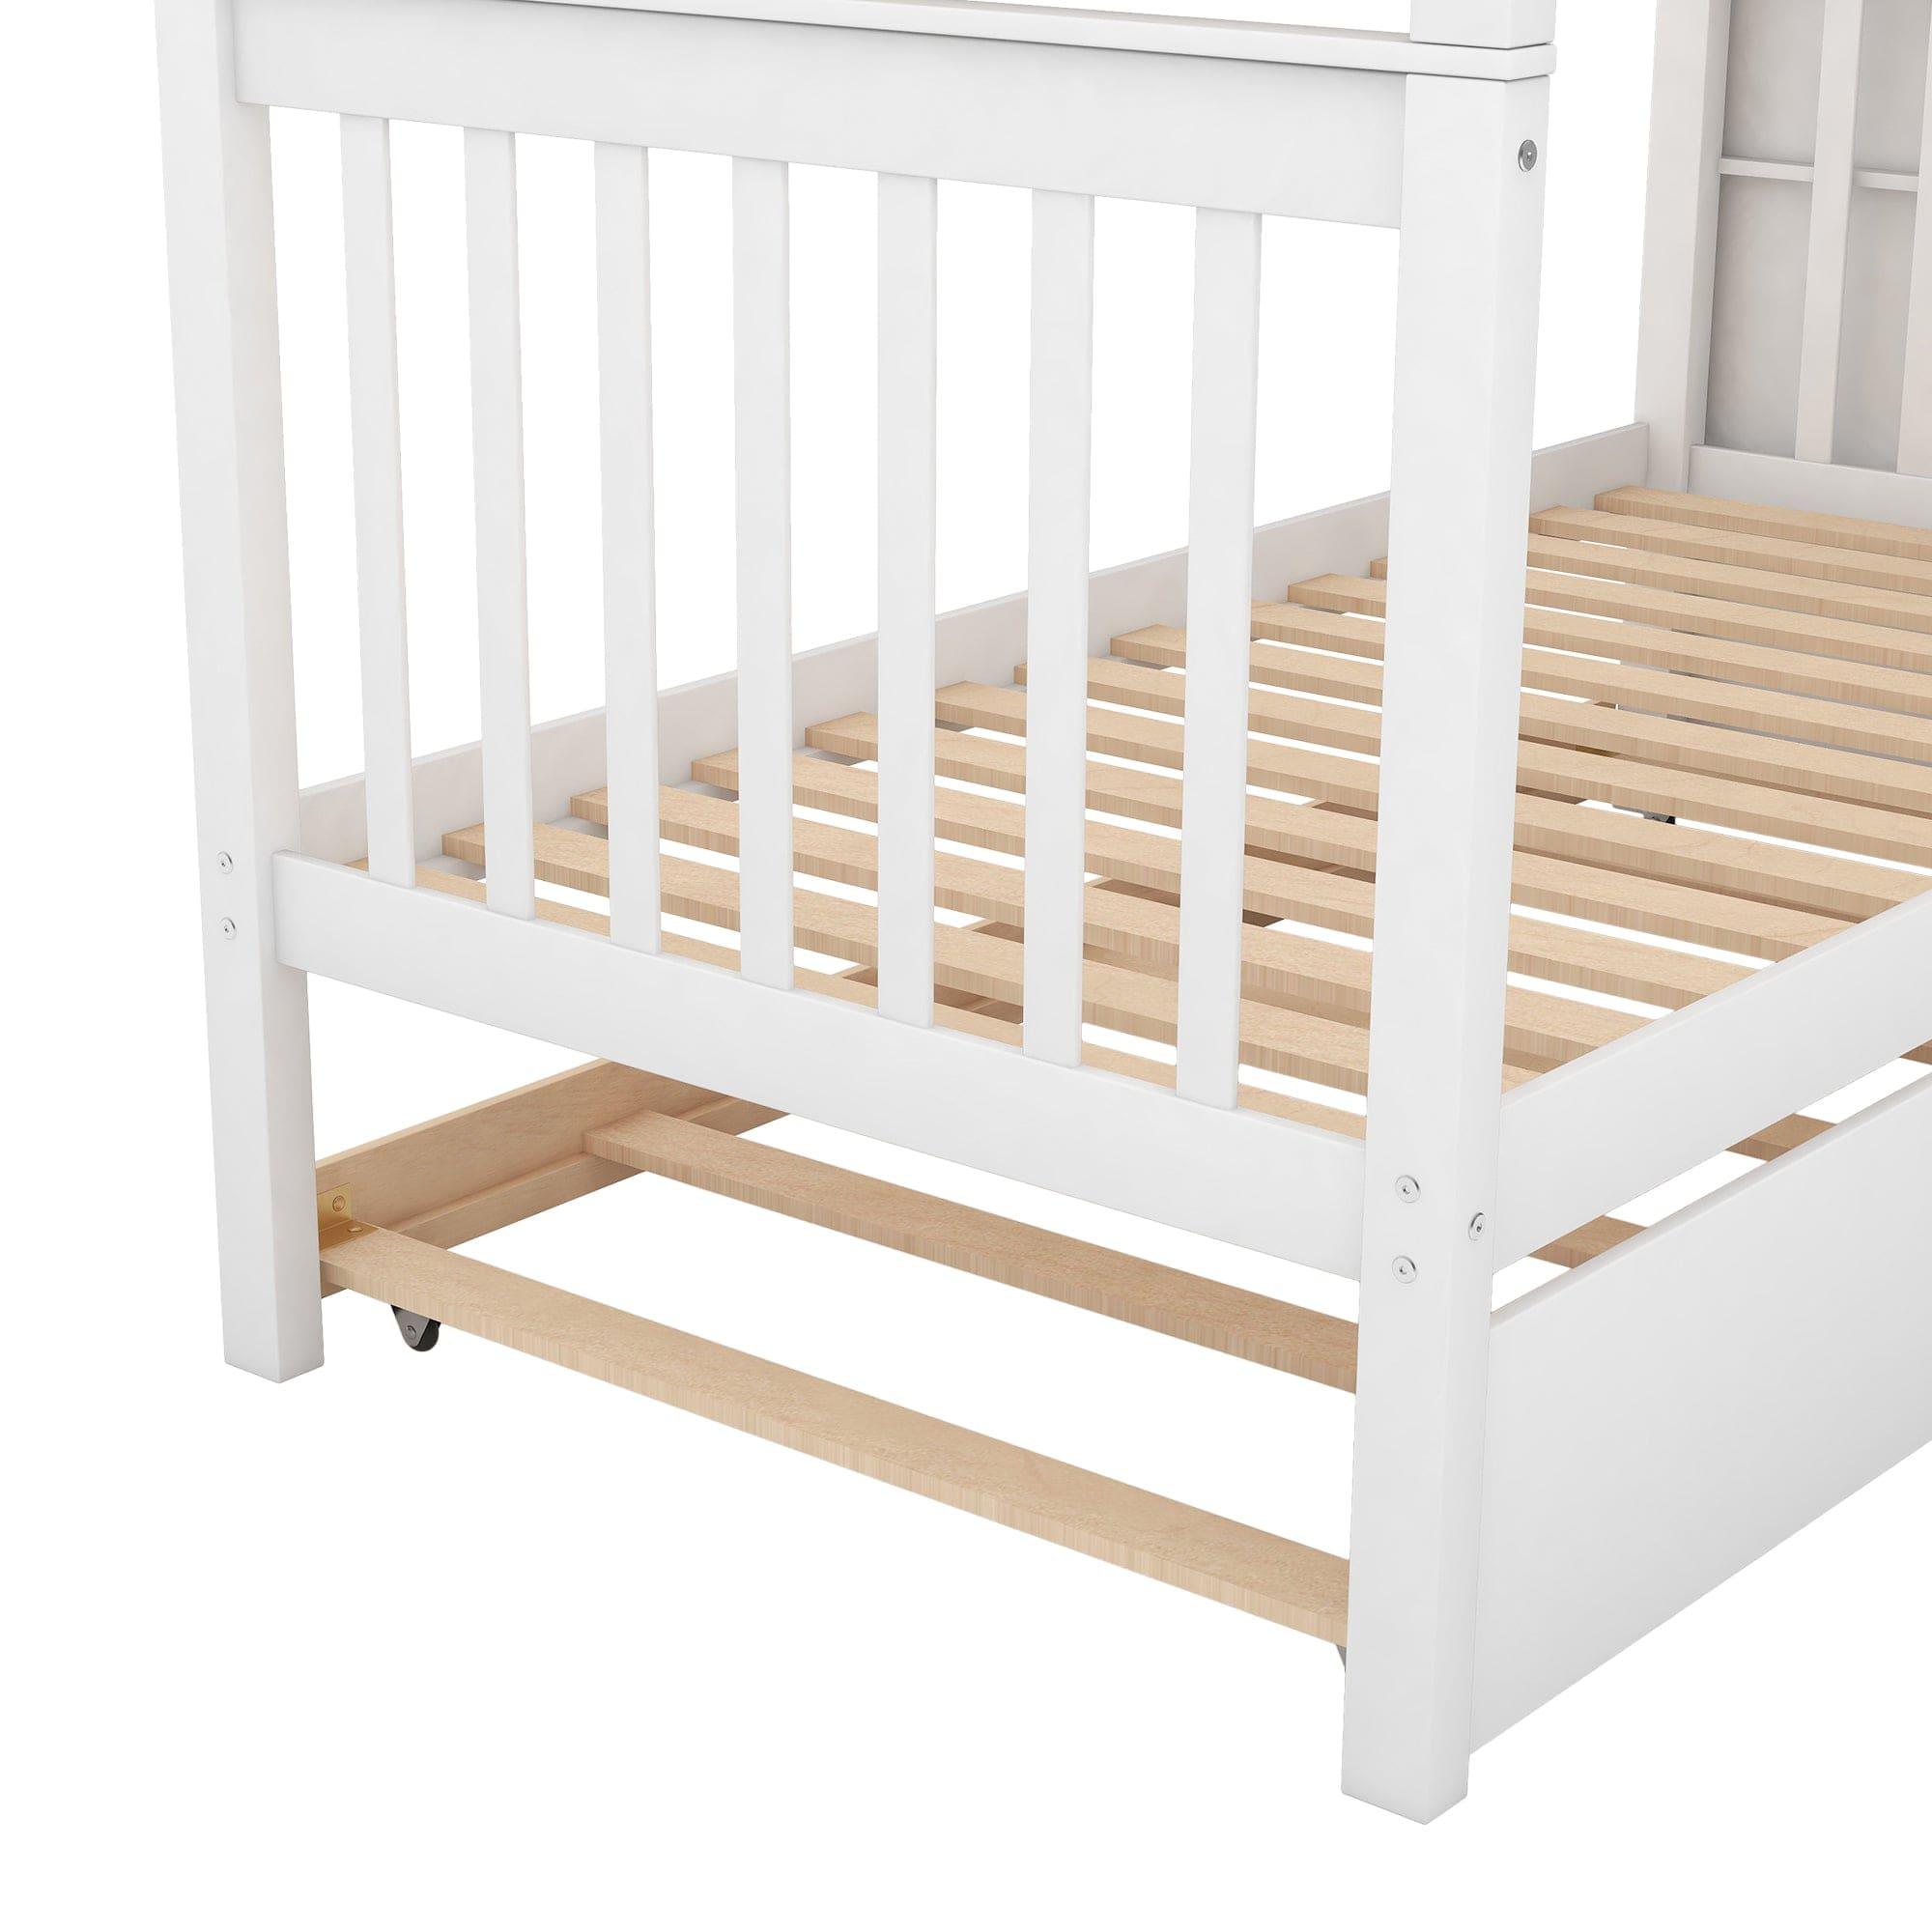 Shop Twin over Twin Bunk Bed with Trundle and Storage, White Mademoiselle Home Decor